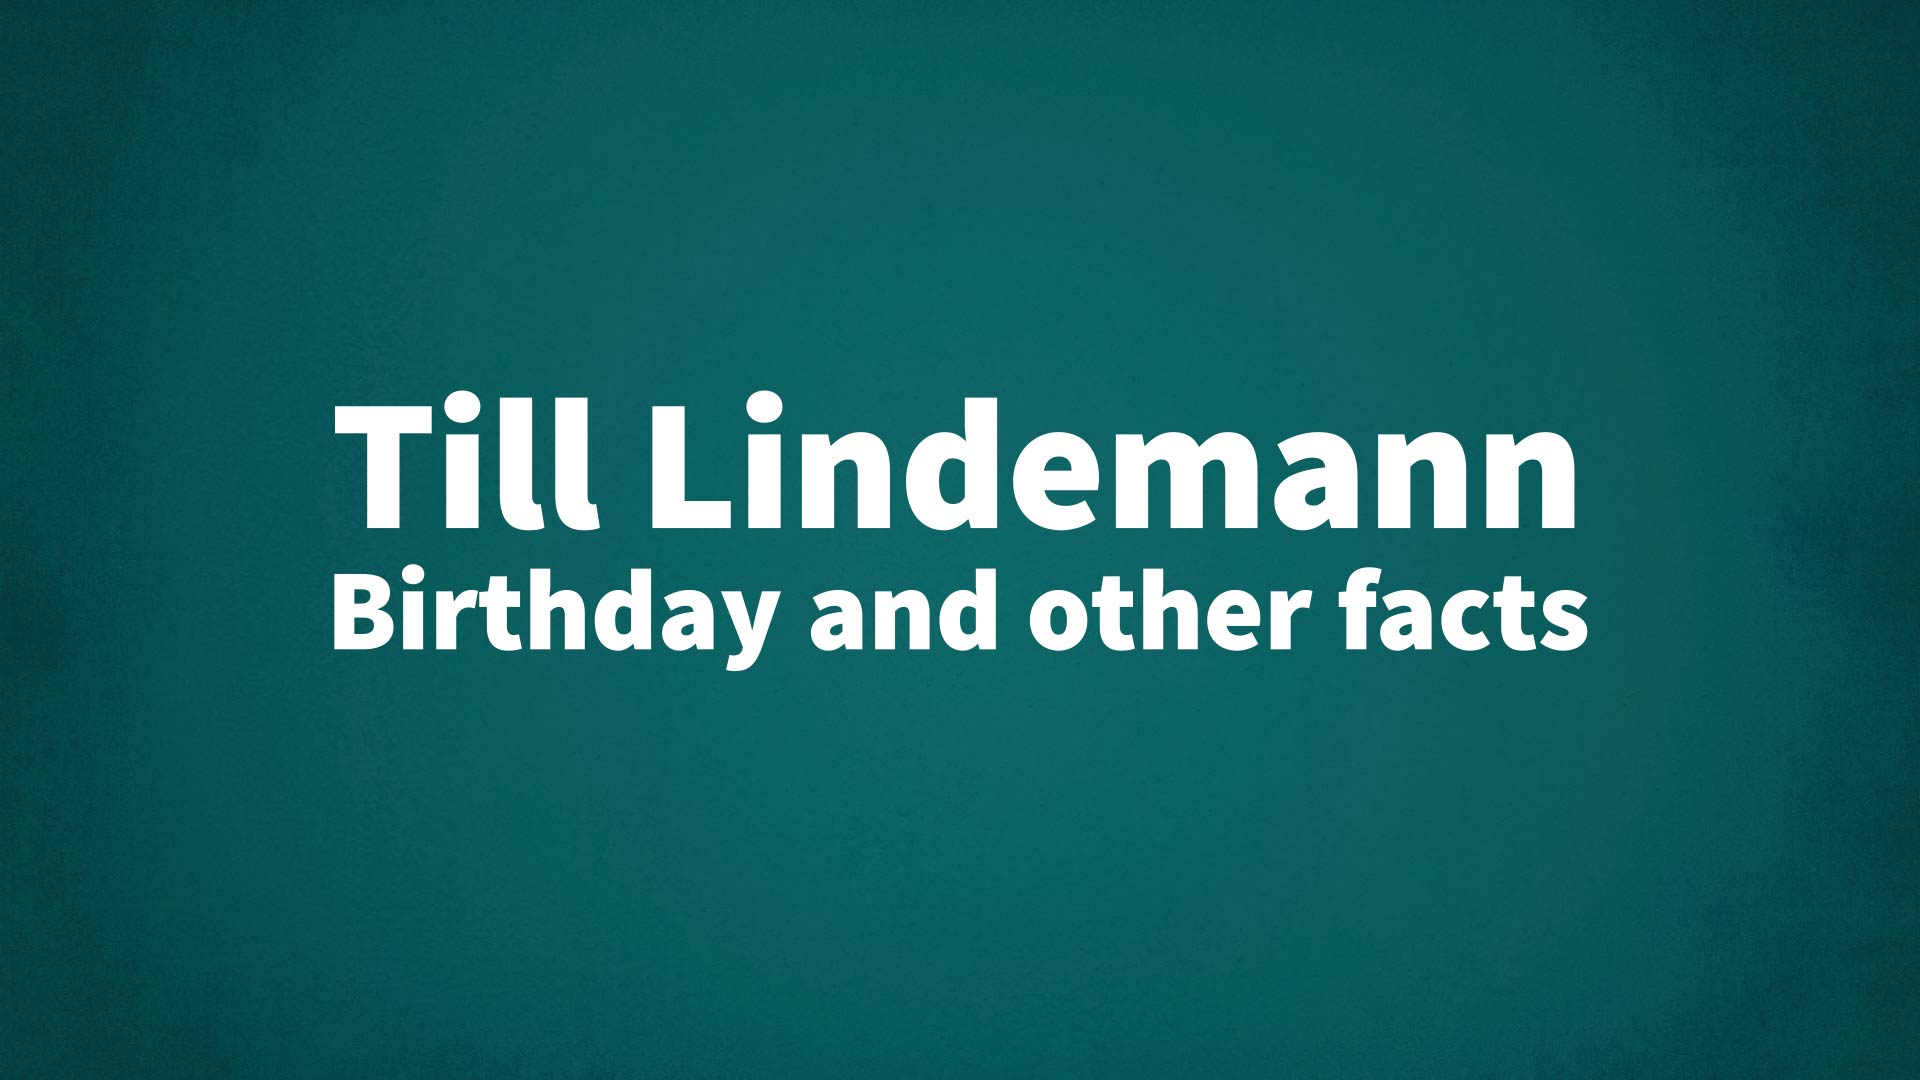 title image for Till Lindemann birthday